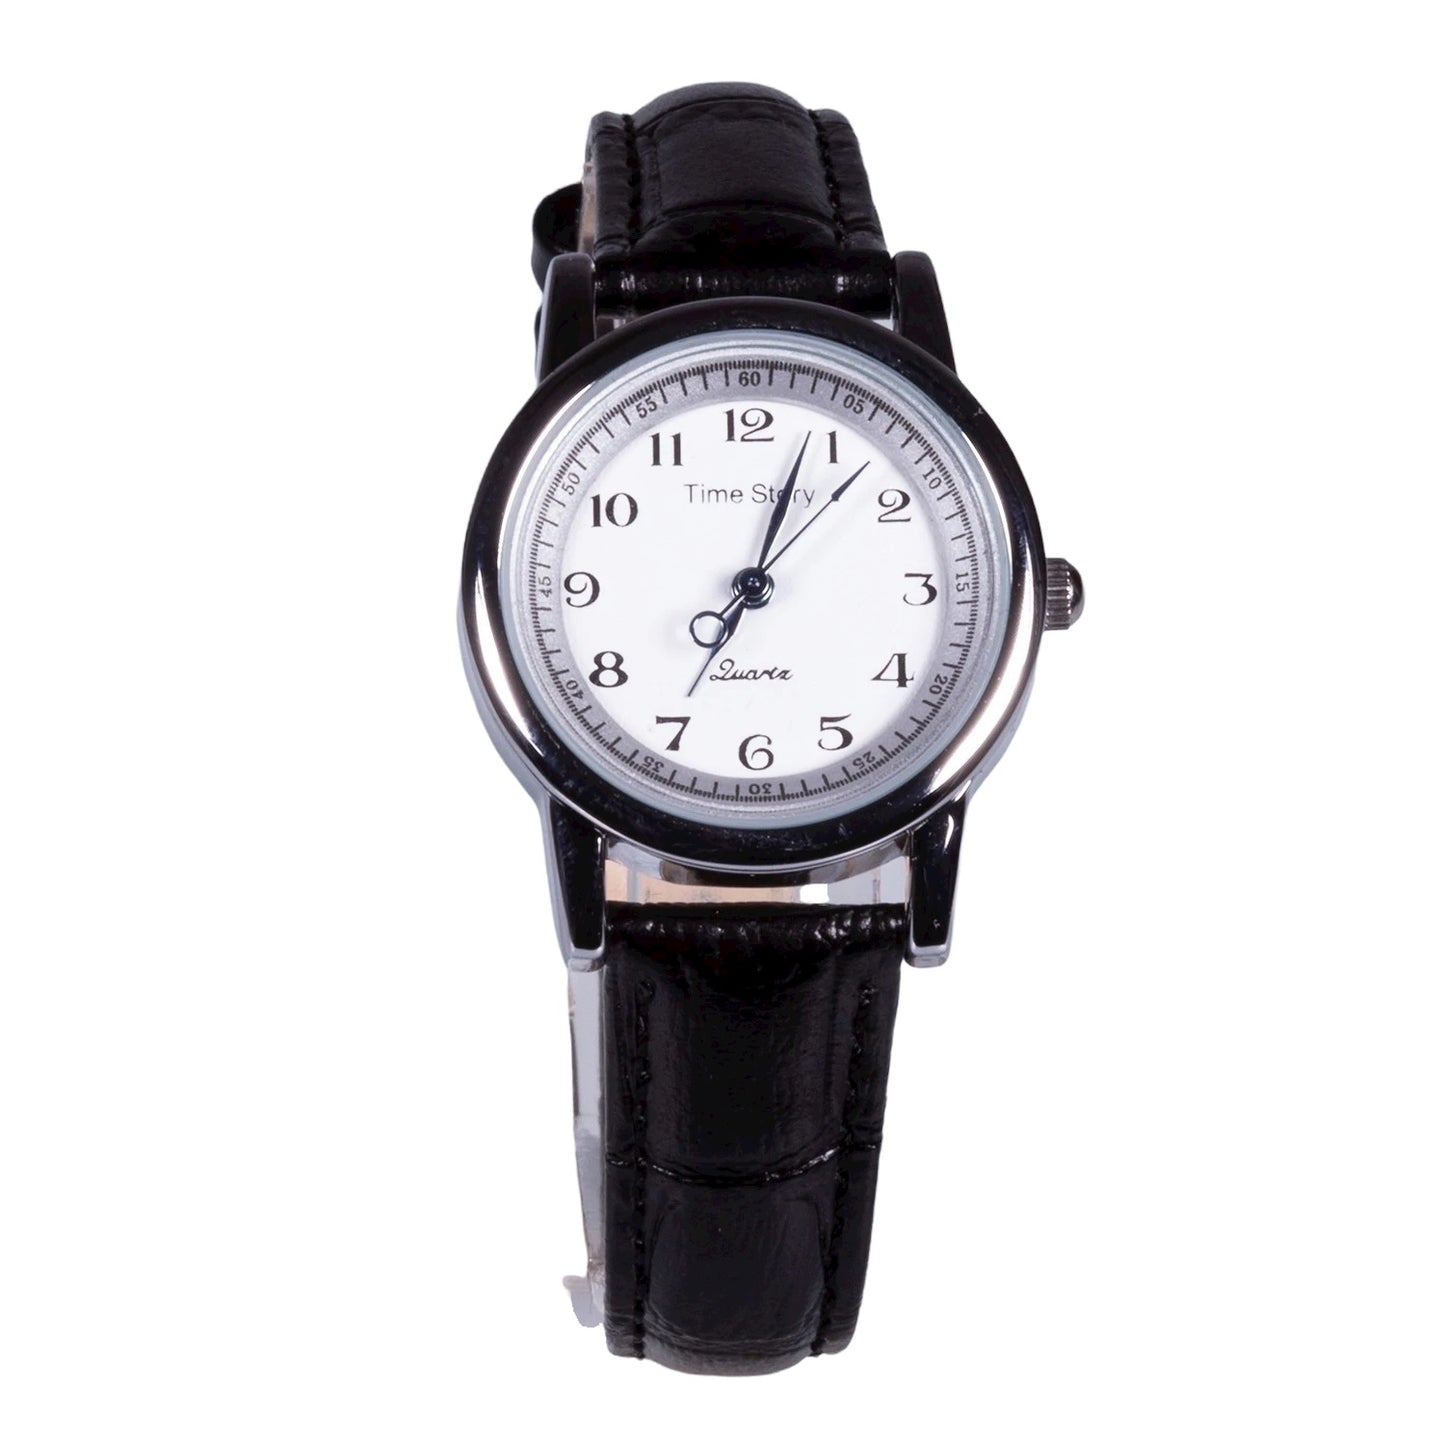 WHITE colour DIAL, black genuine leather band, stainless steel watch